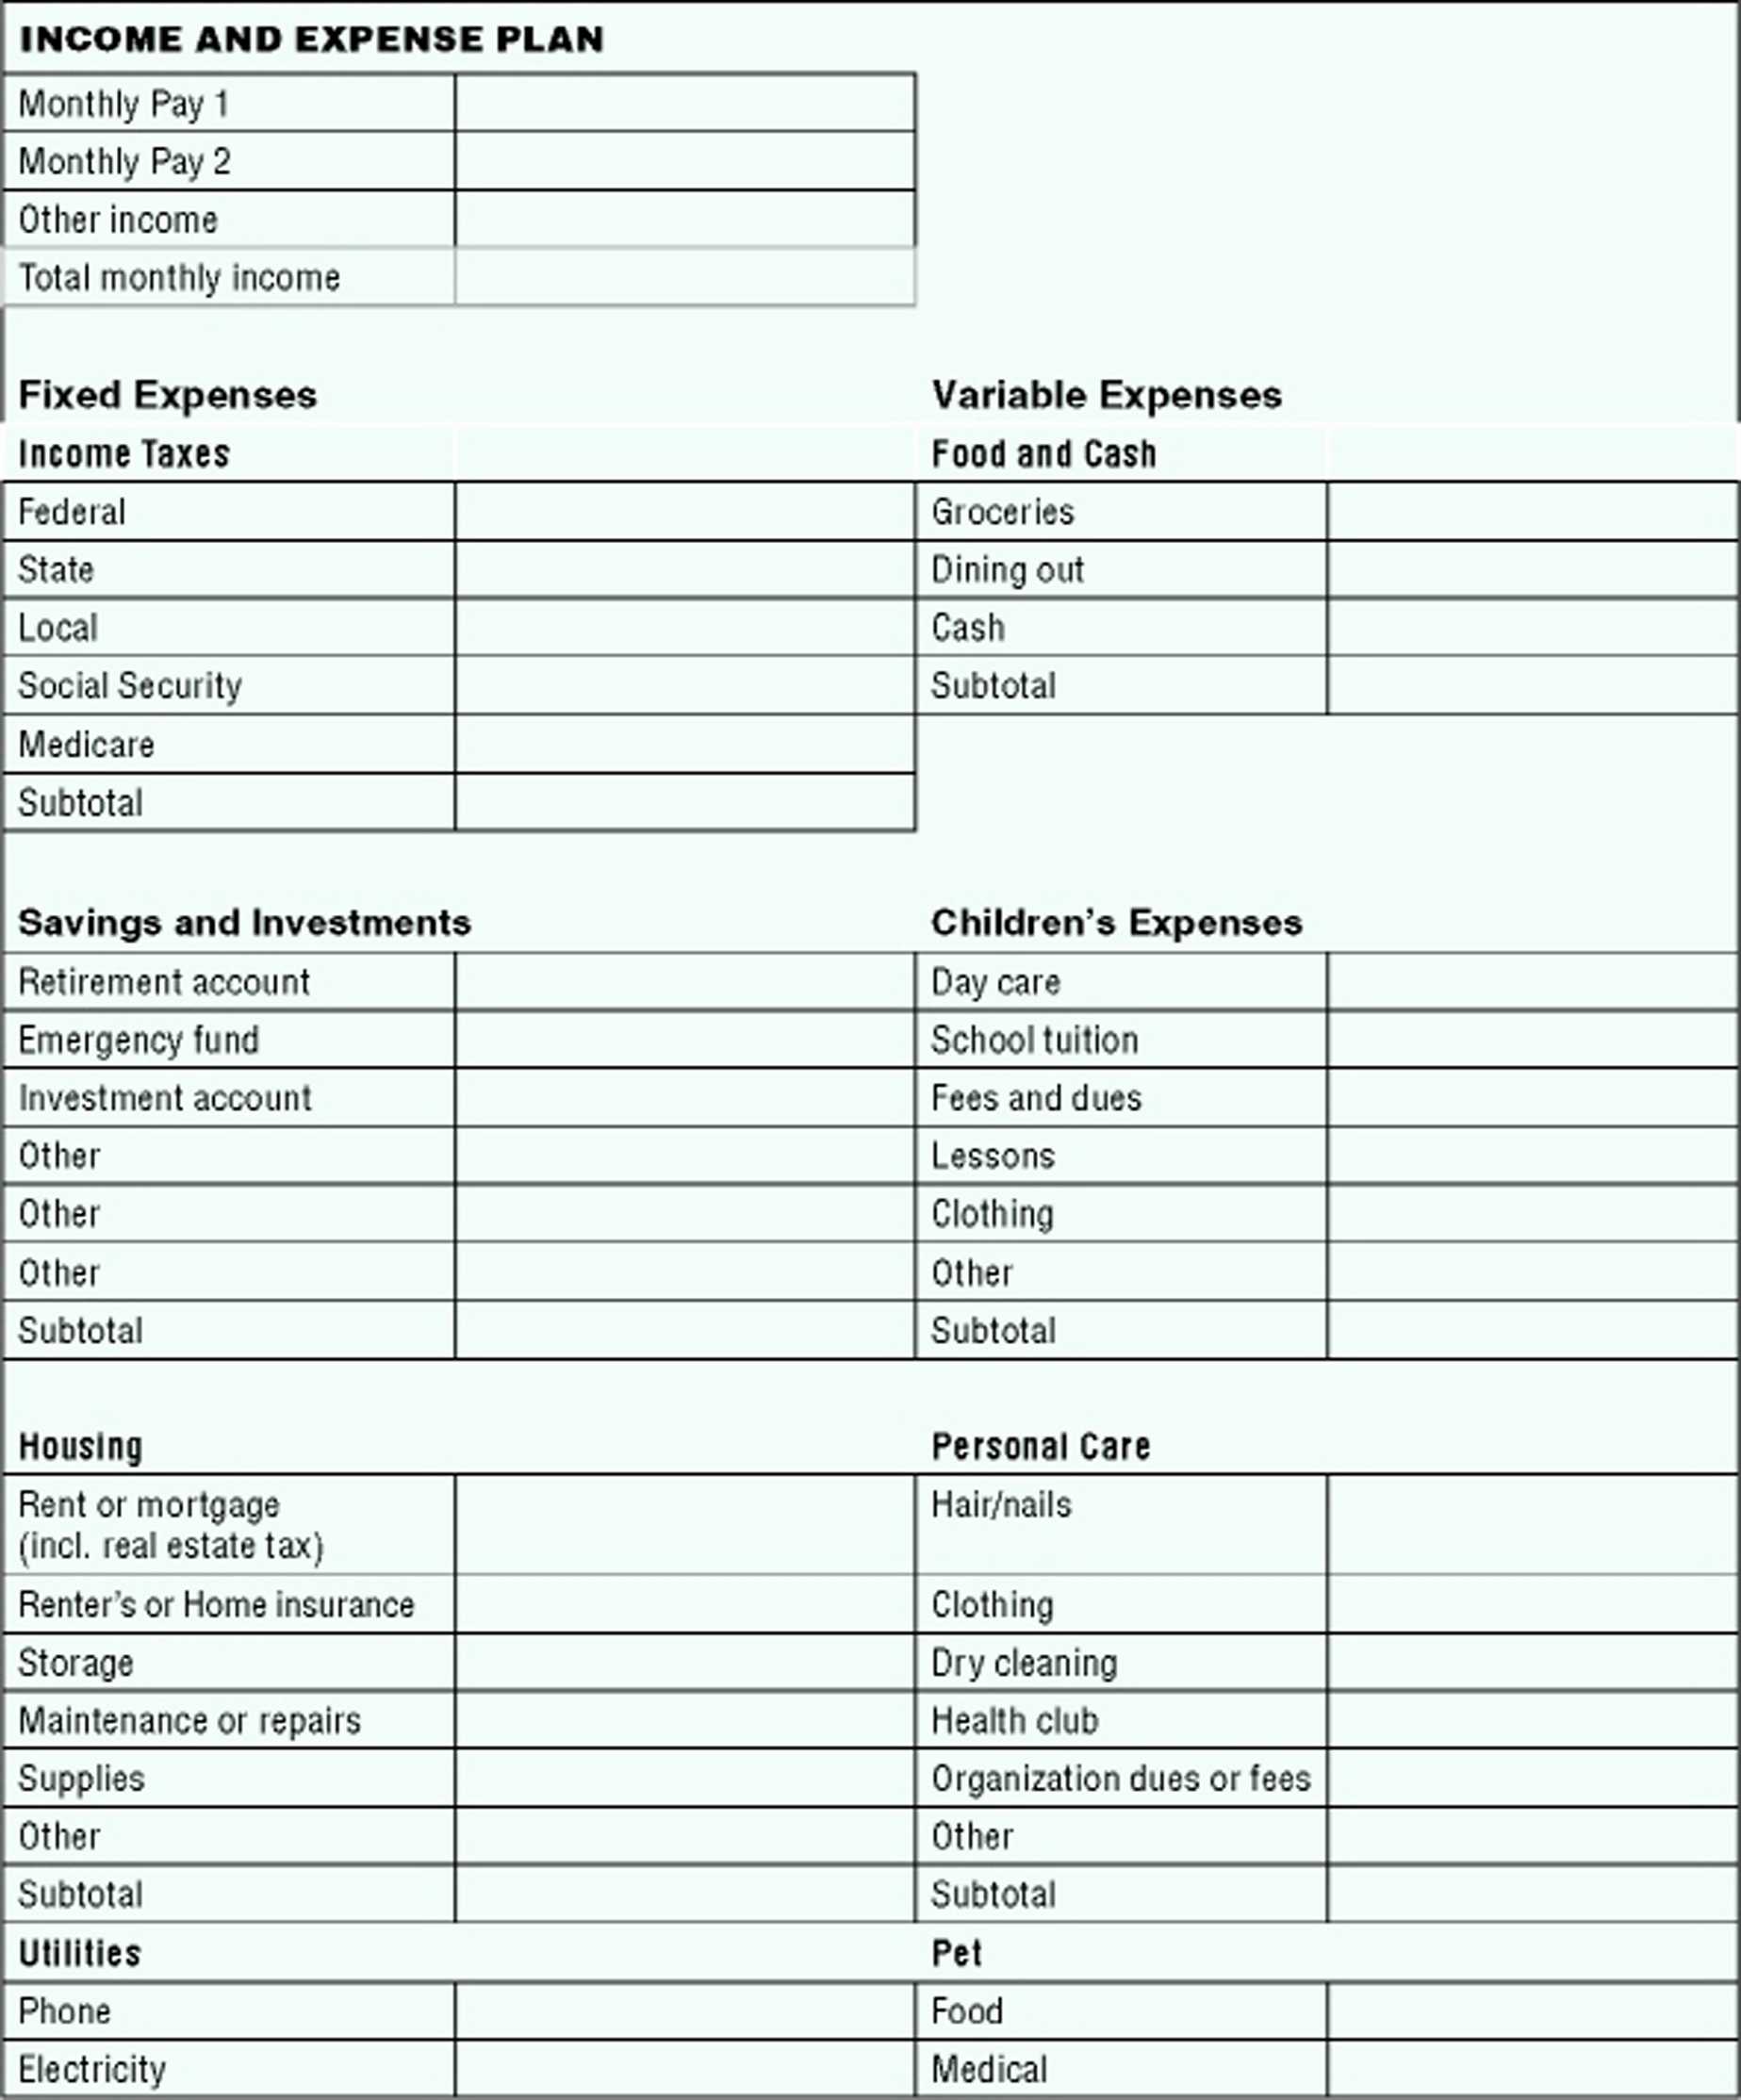 Social Security Worksheet Calculator Along with Mortgage Calculator with Taxes and Insurance Spreadsheet 2018 social